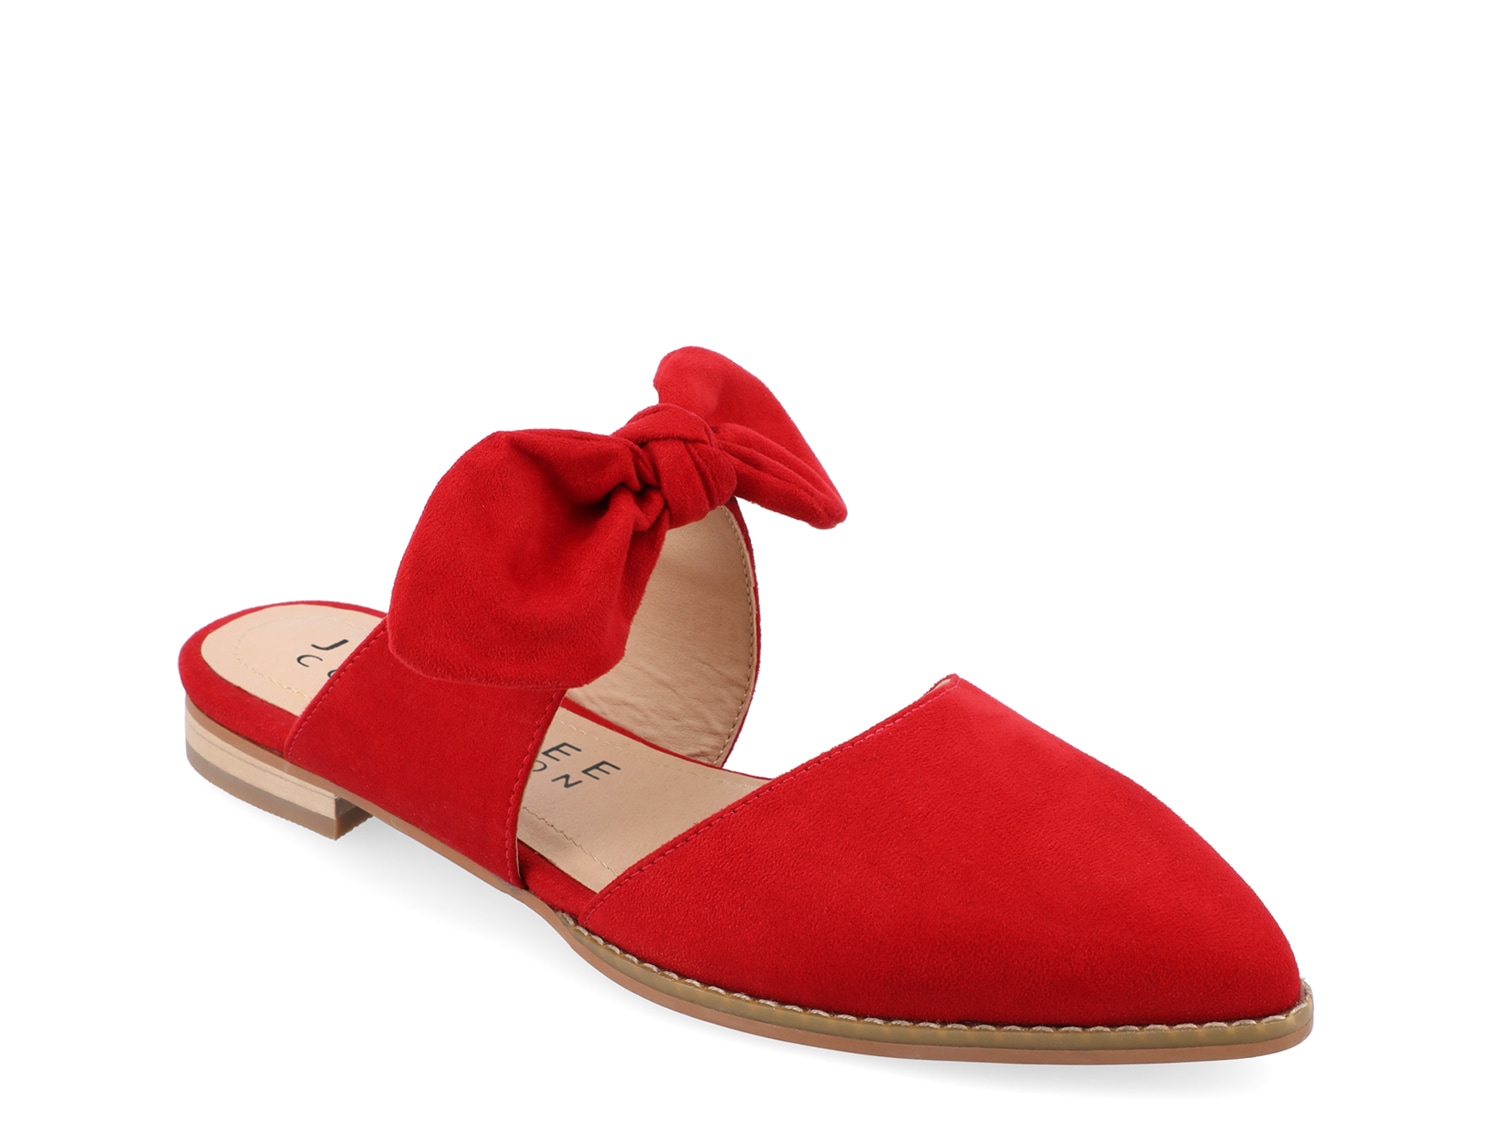 Journee Collection Telulah Mule - Free Shipping | DSW